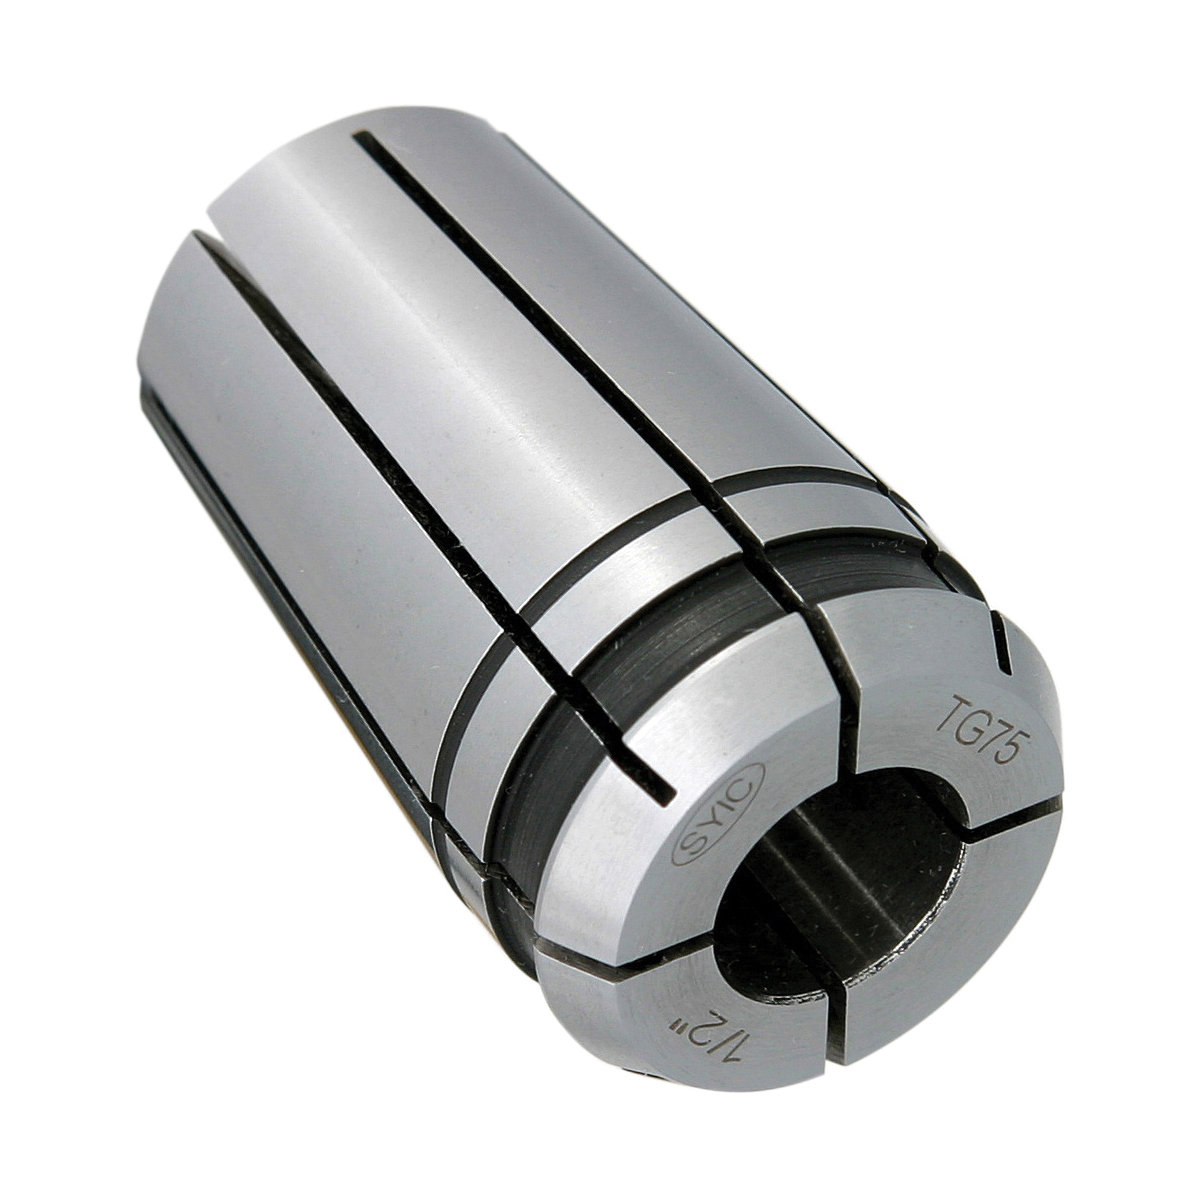 TG75 21/64" COLLET